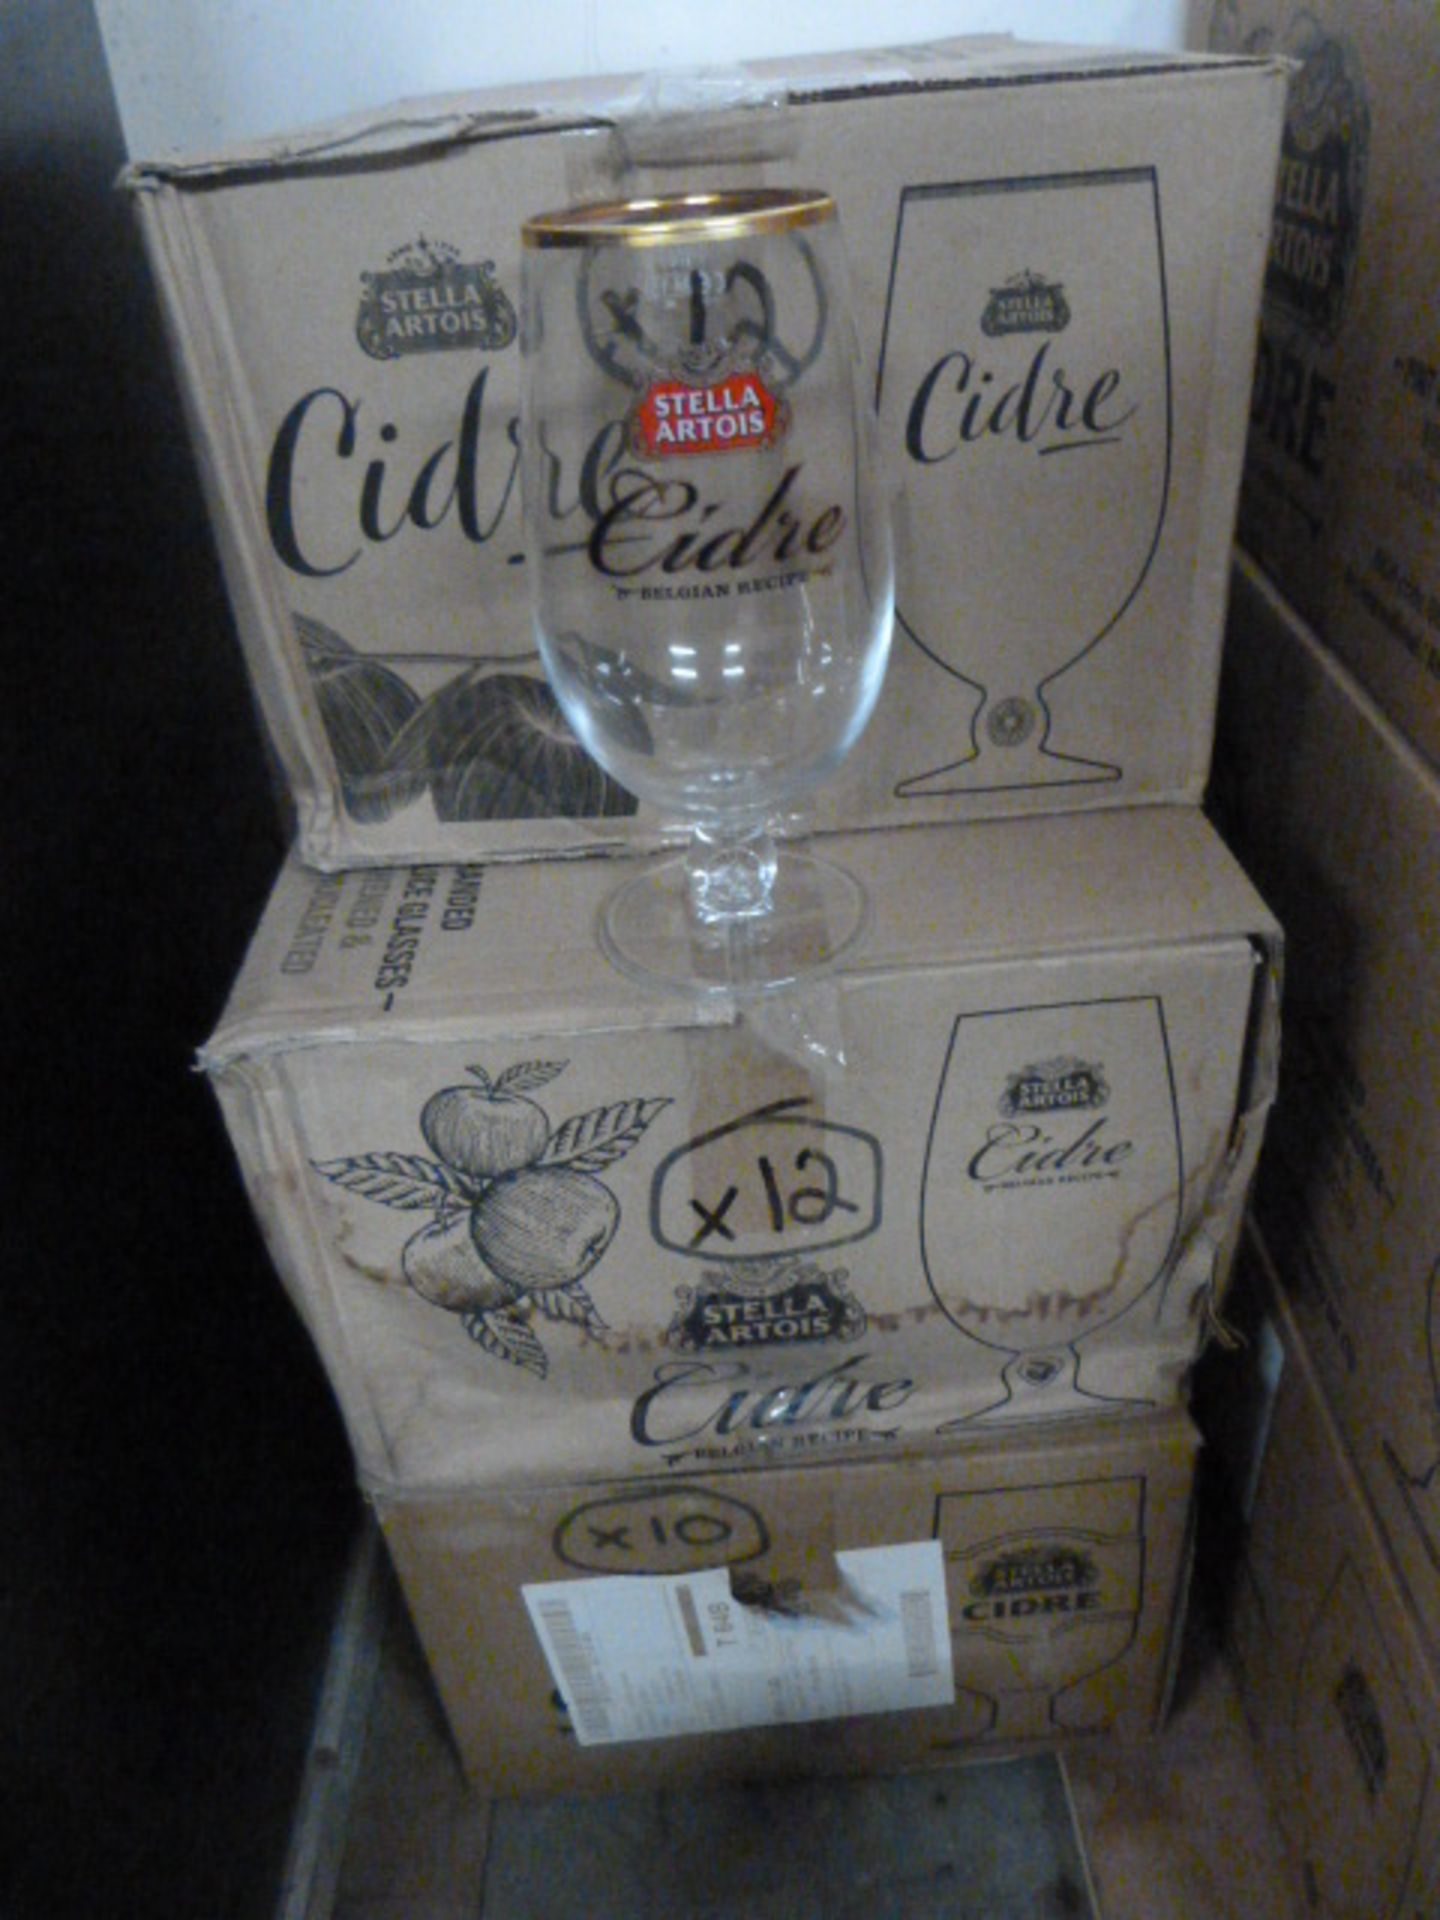 *Three Boxes Containing 34 Cider Glasses